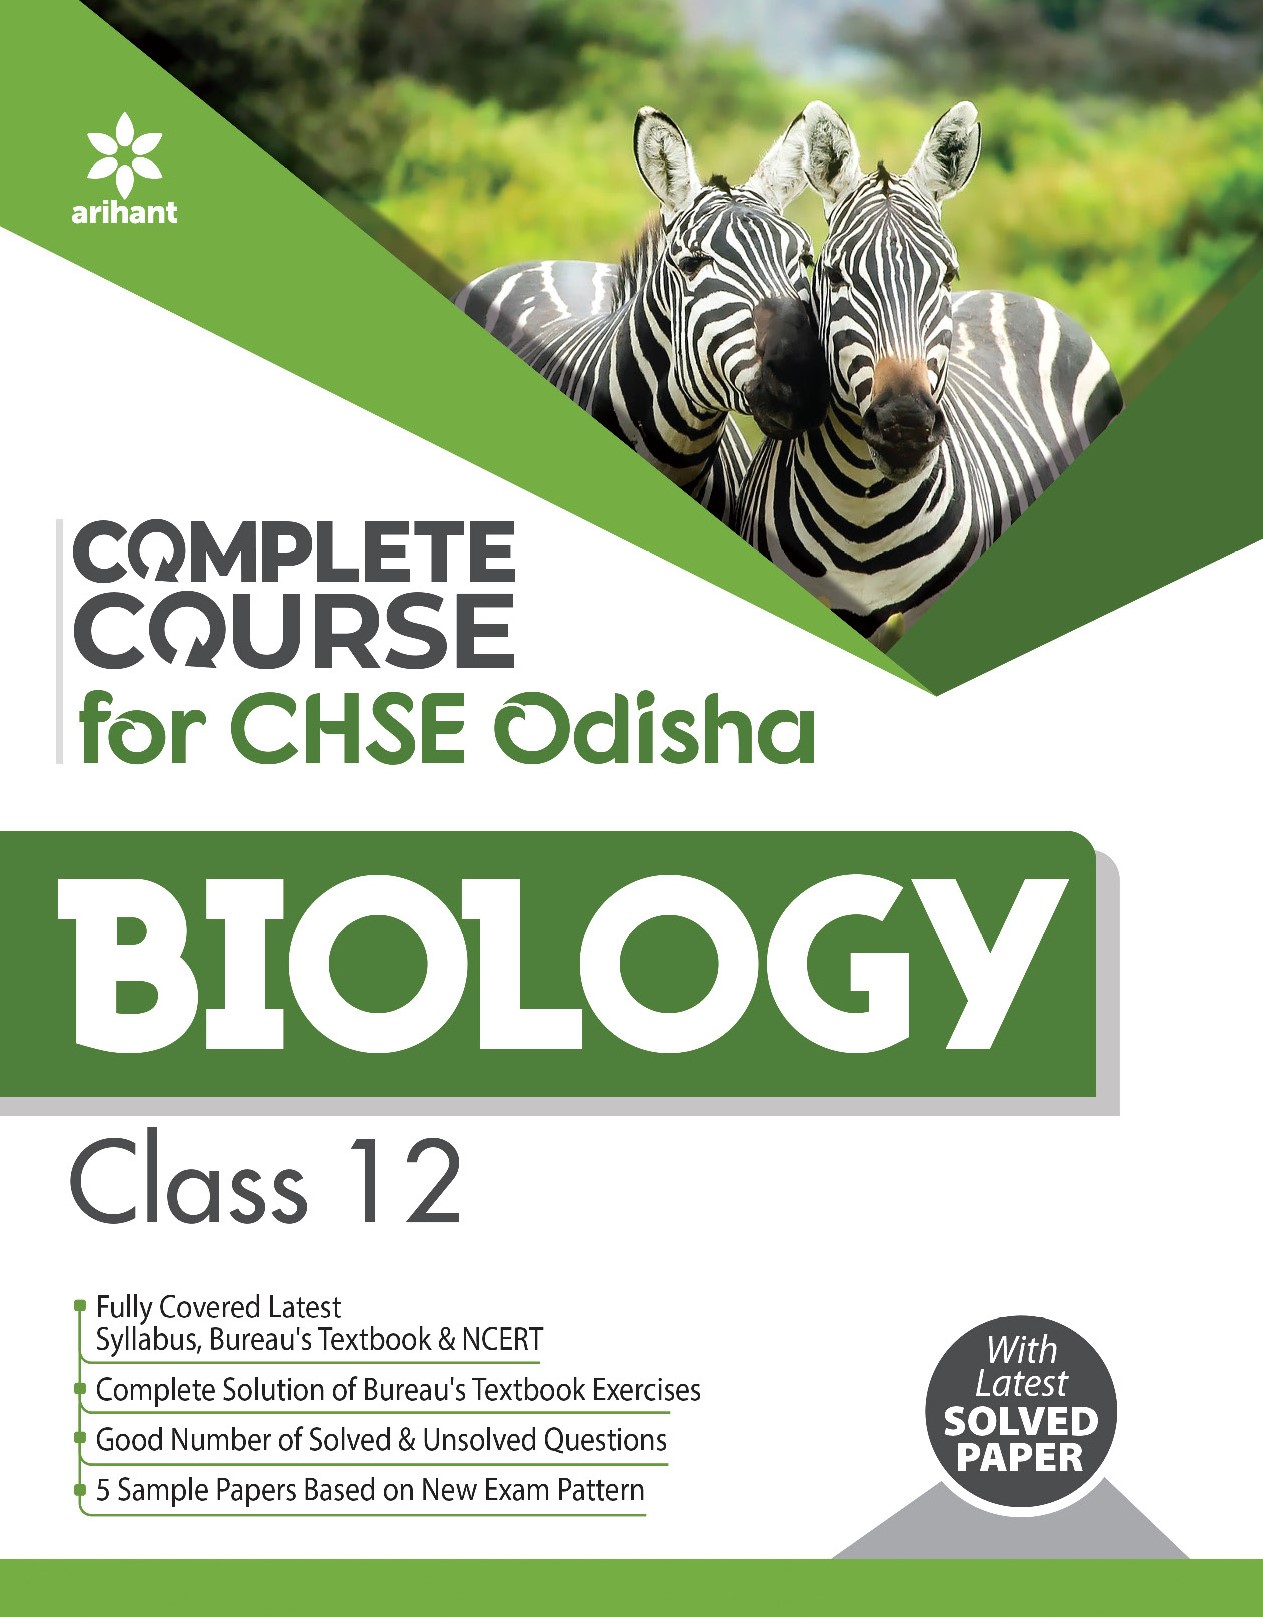 Complete Course For CHSE Odisha Biology Class 12 for 2021 Exam